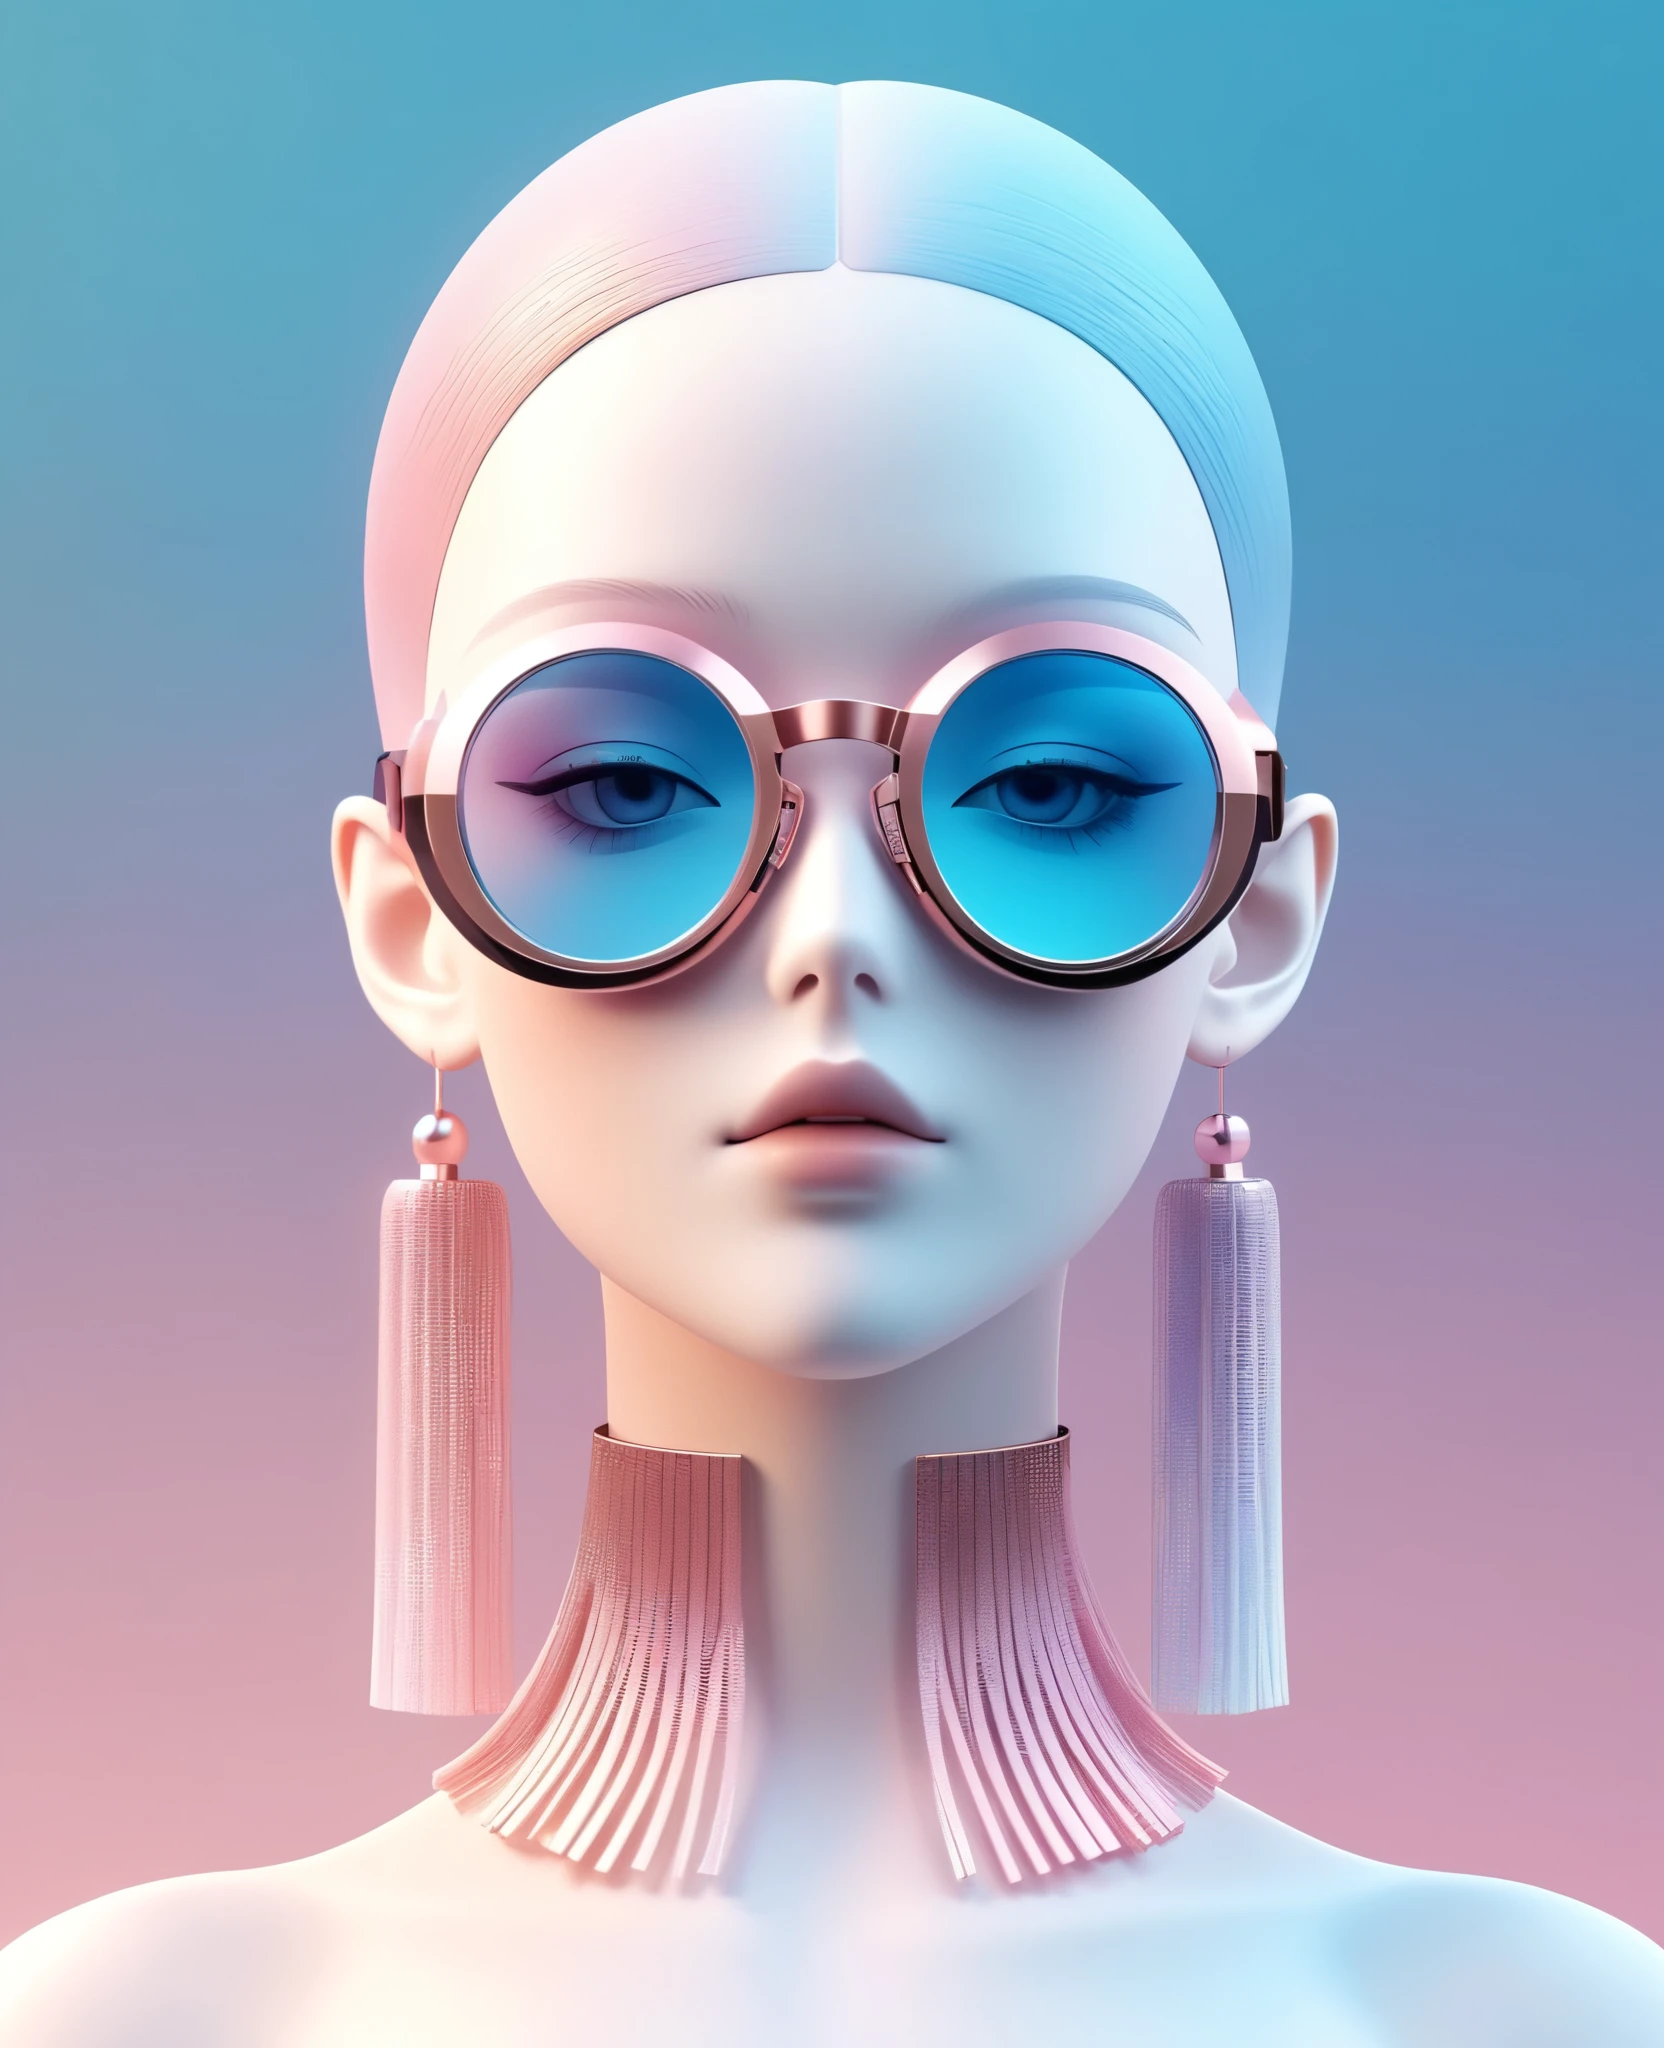 3D illustration of upper body and face of artificial intelligence model wearing futuristic glasses, Stylish glasses with tassels，Gradient background, Pastel color palette, pink blue, Simplicity, cold metallic textures, Surrealism,